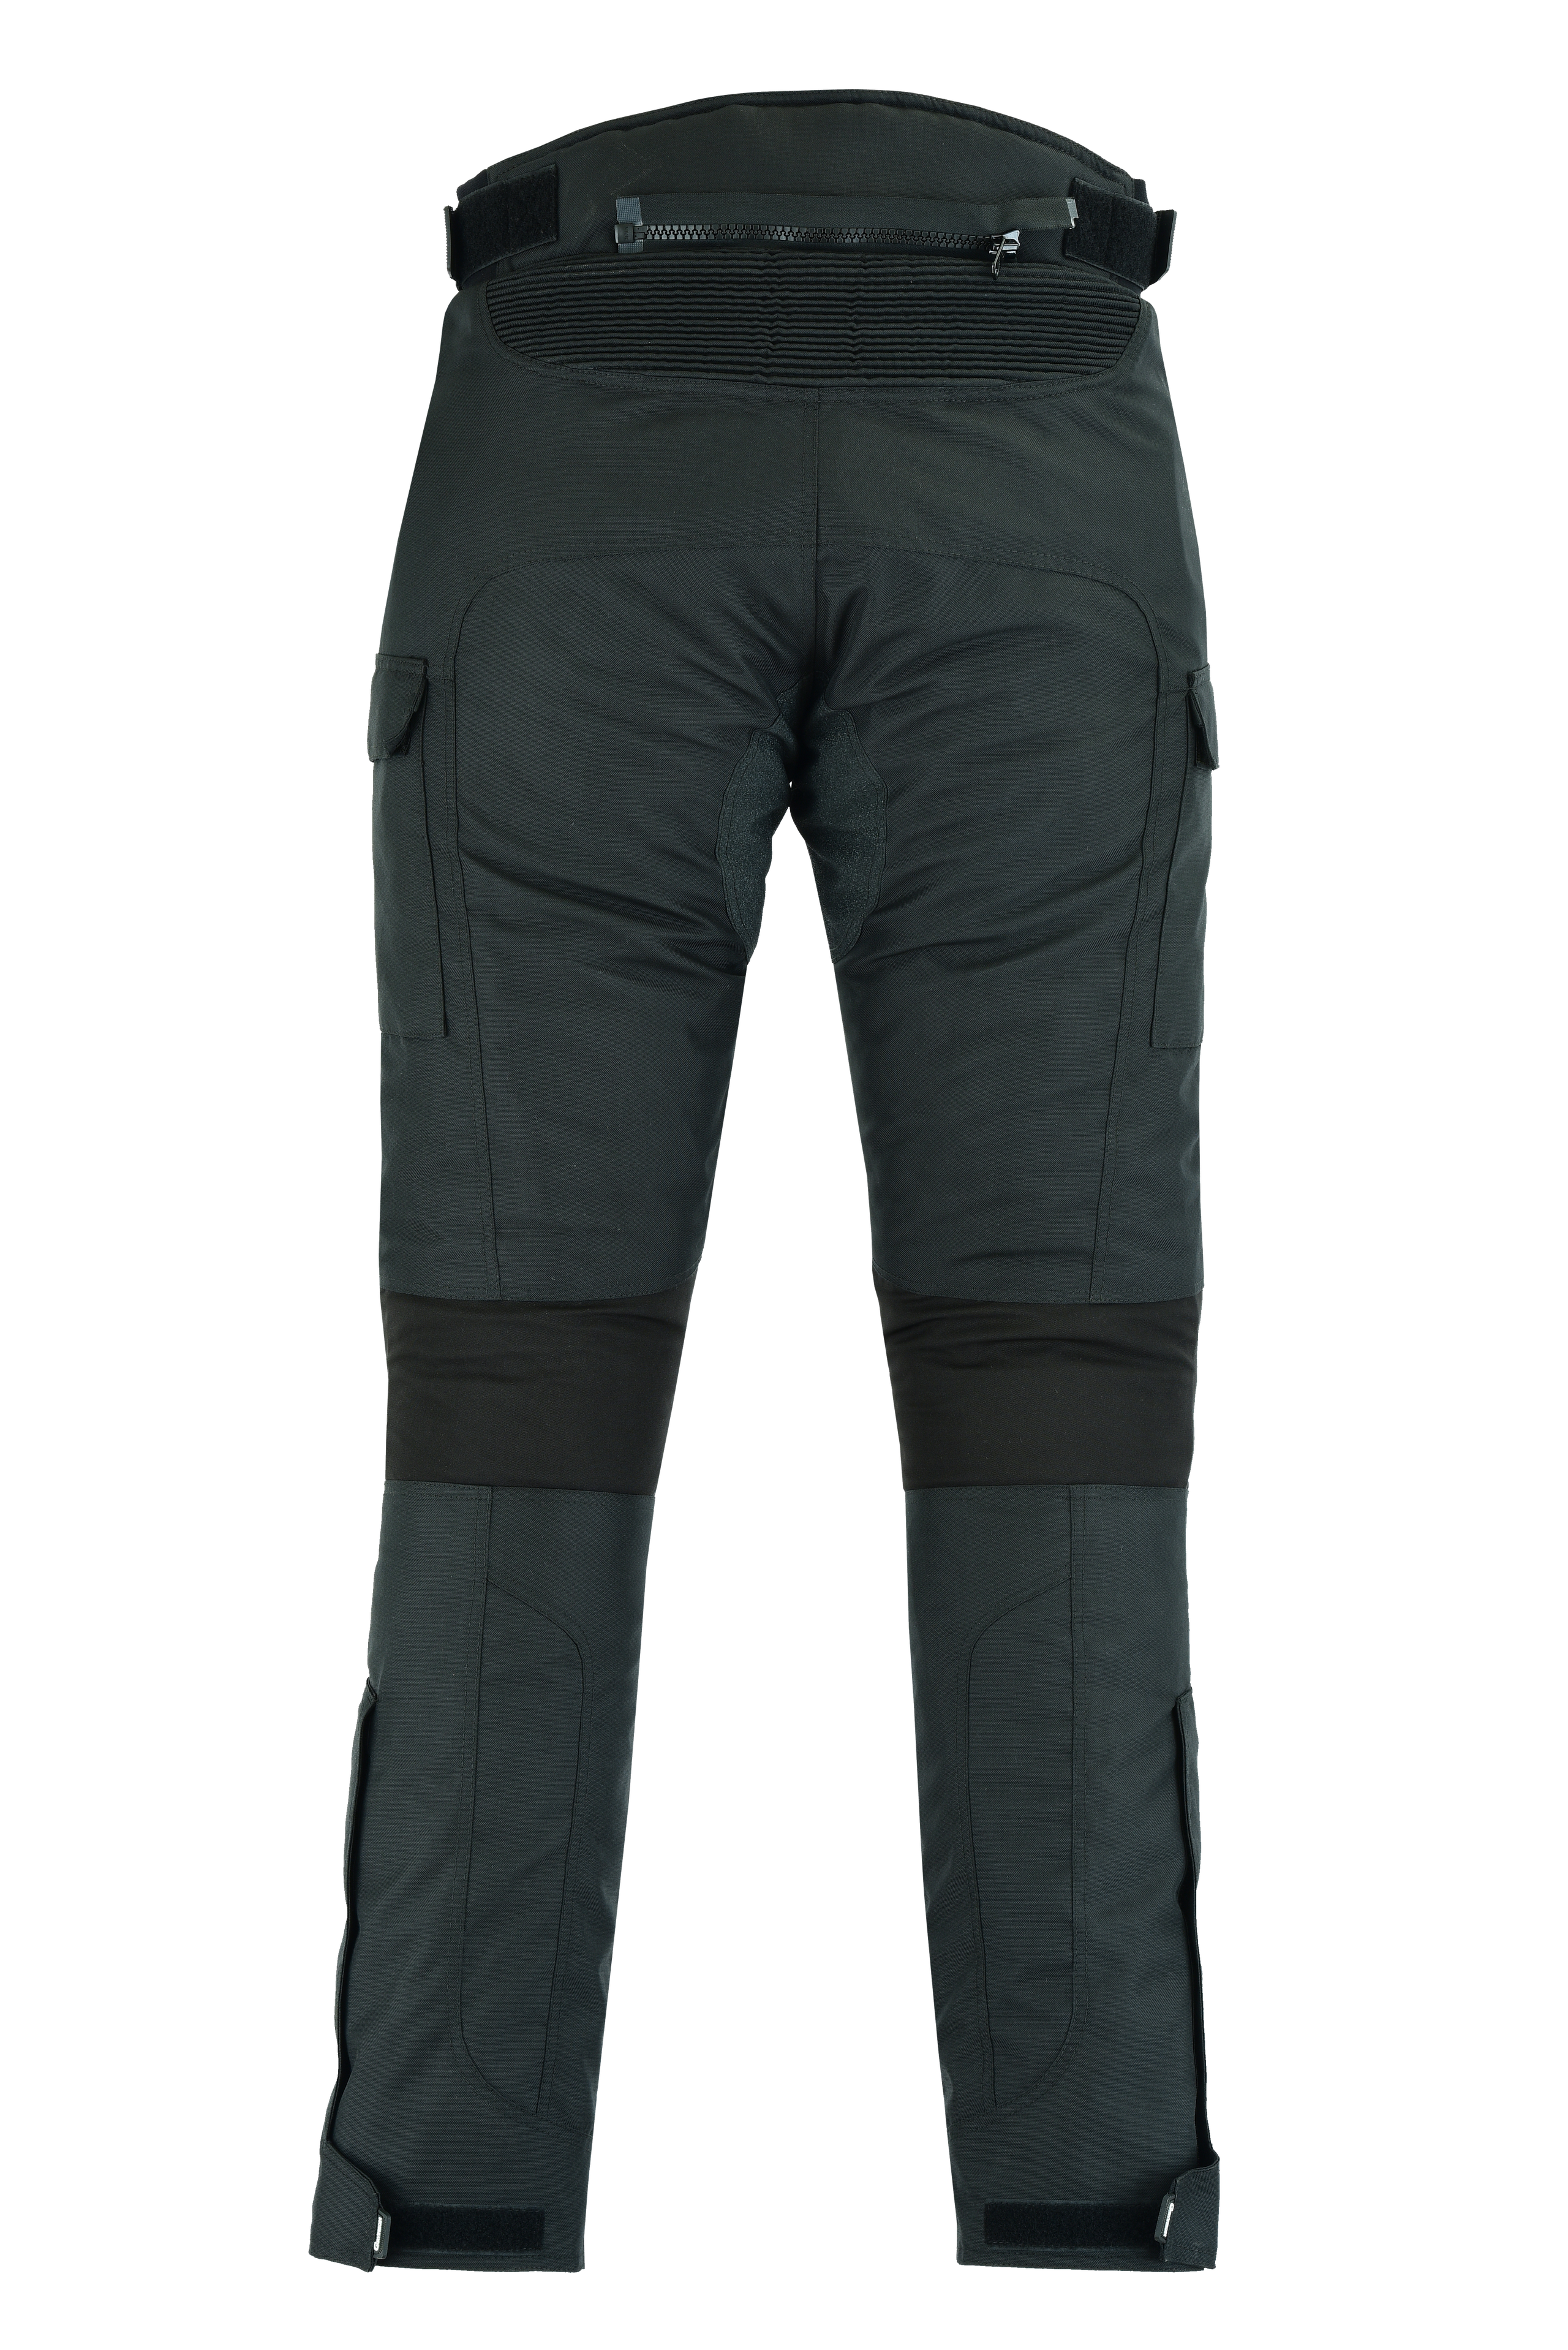 Gryphon Men's Indy Motorcycle Pants